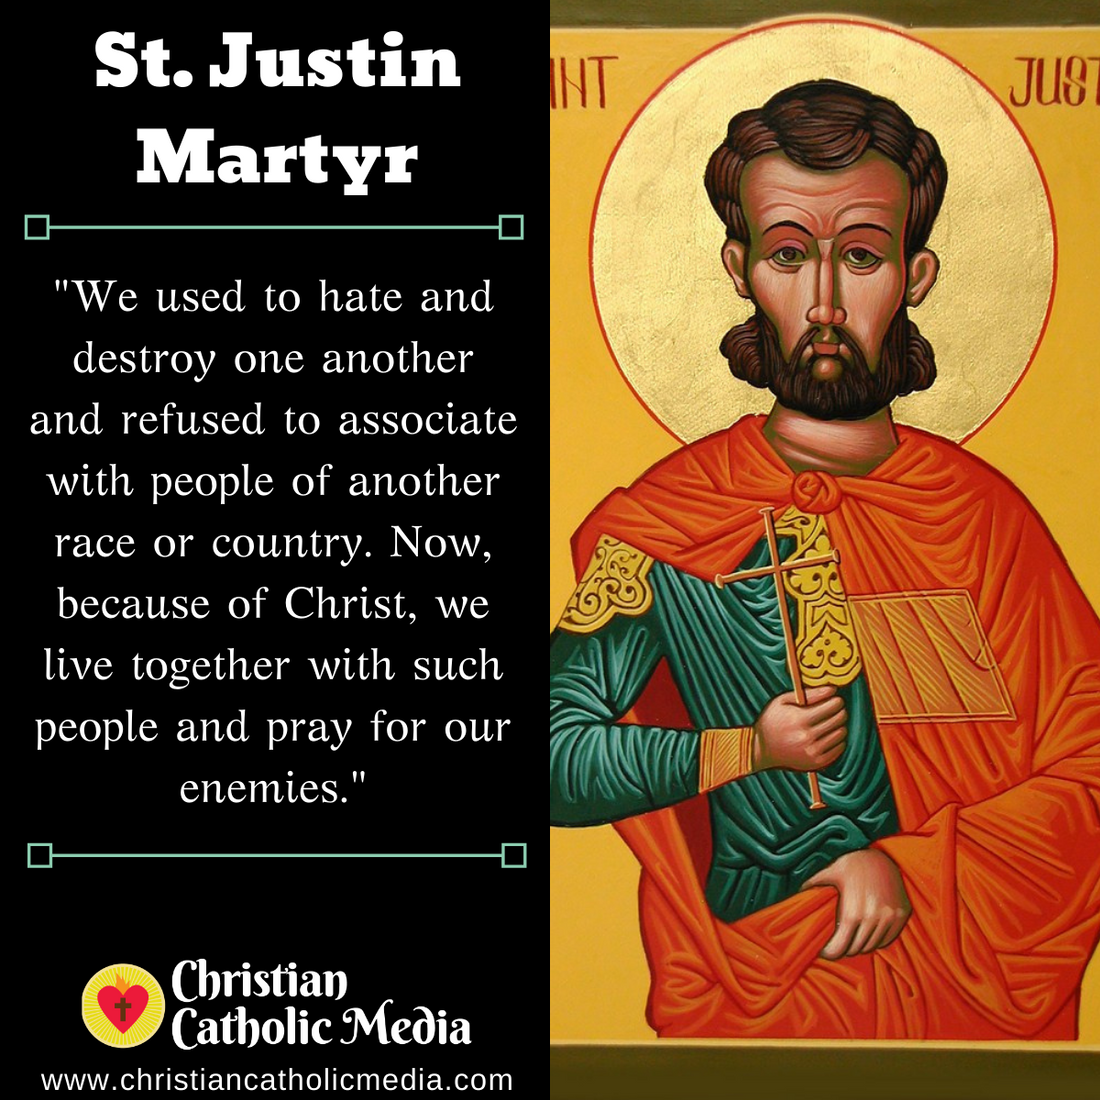 St. Justin Martyr - Tuesday June 1, 2021